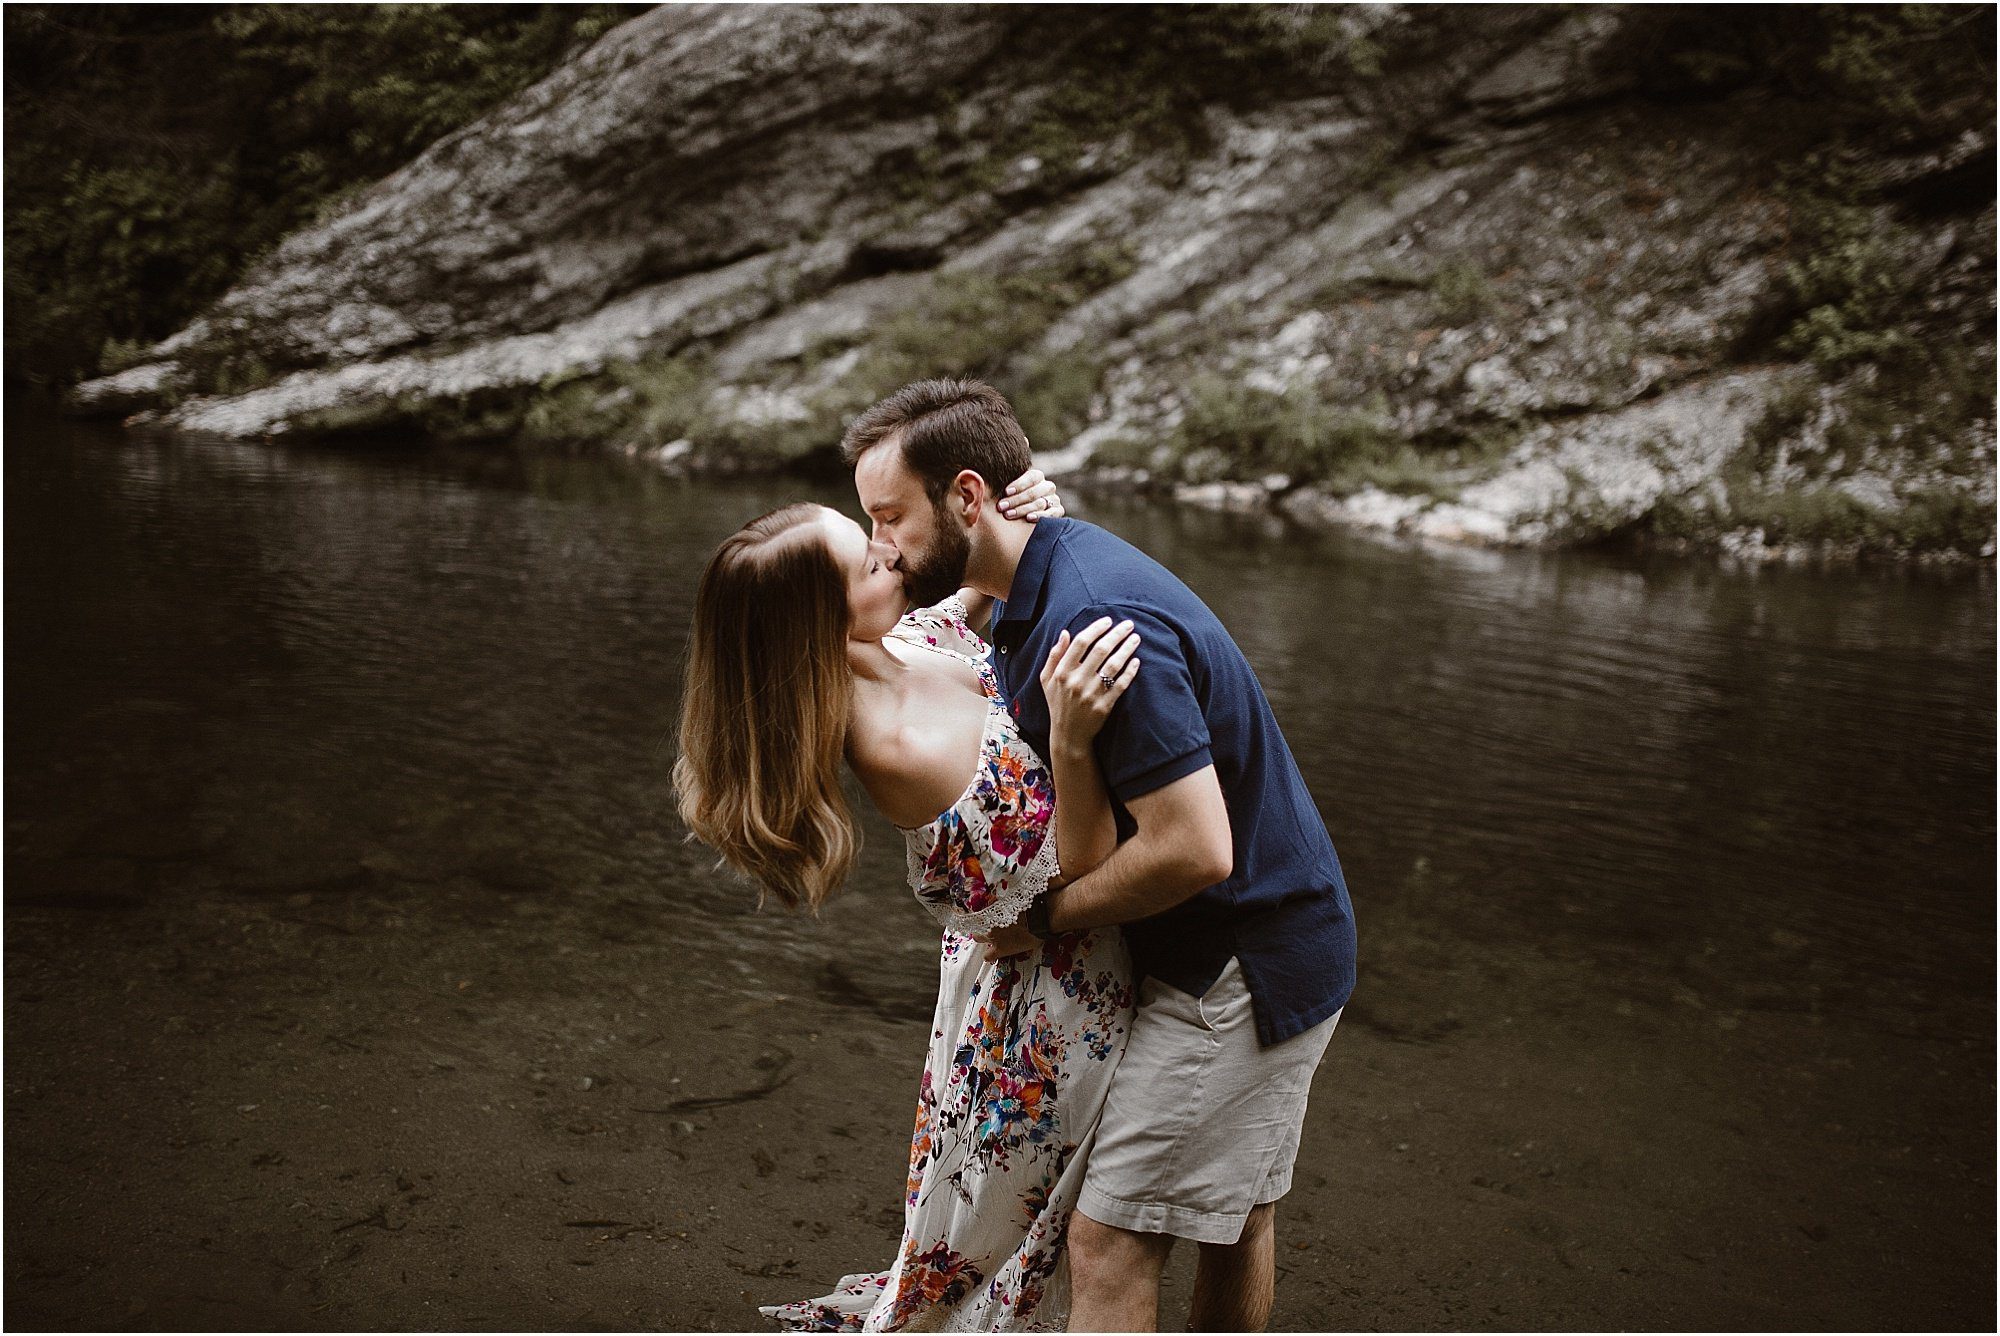 Little River Engagement Photos in the Smokies